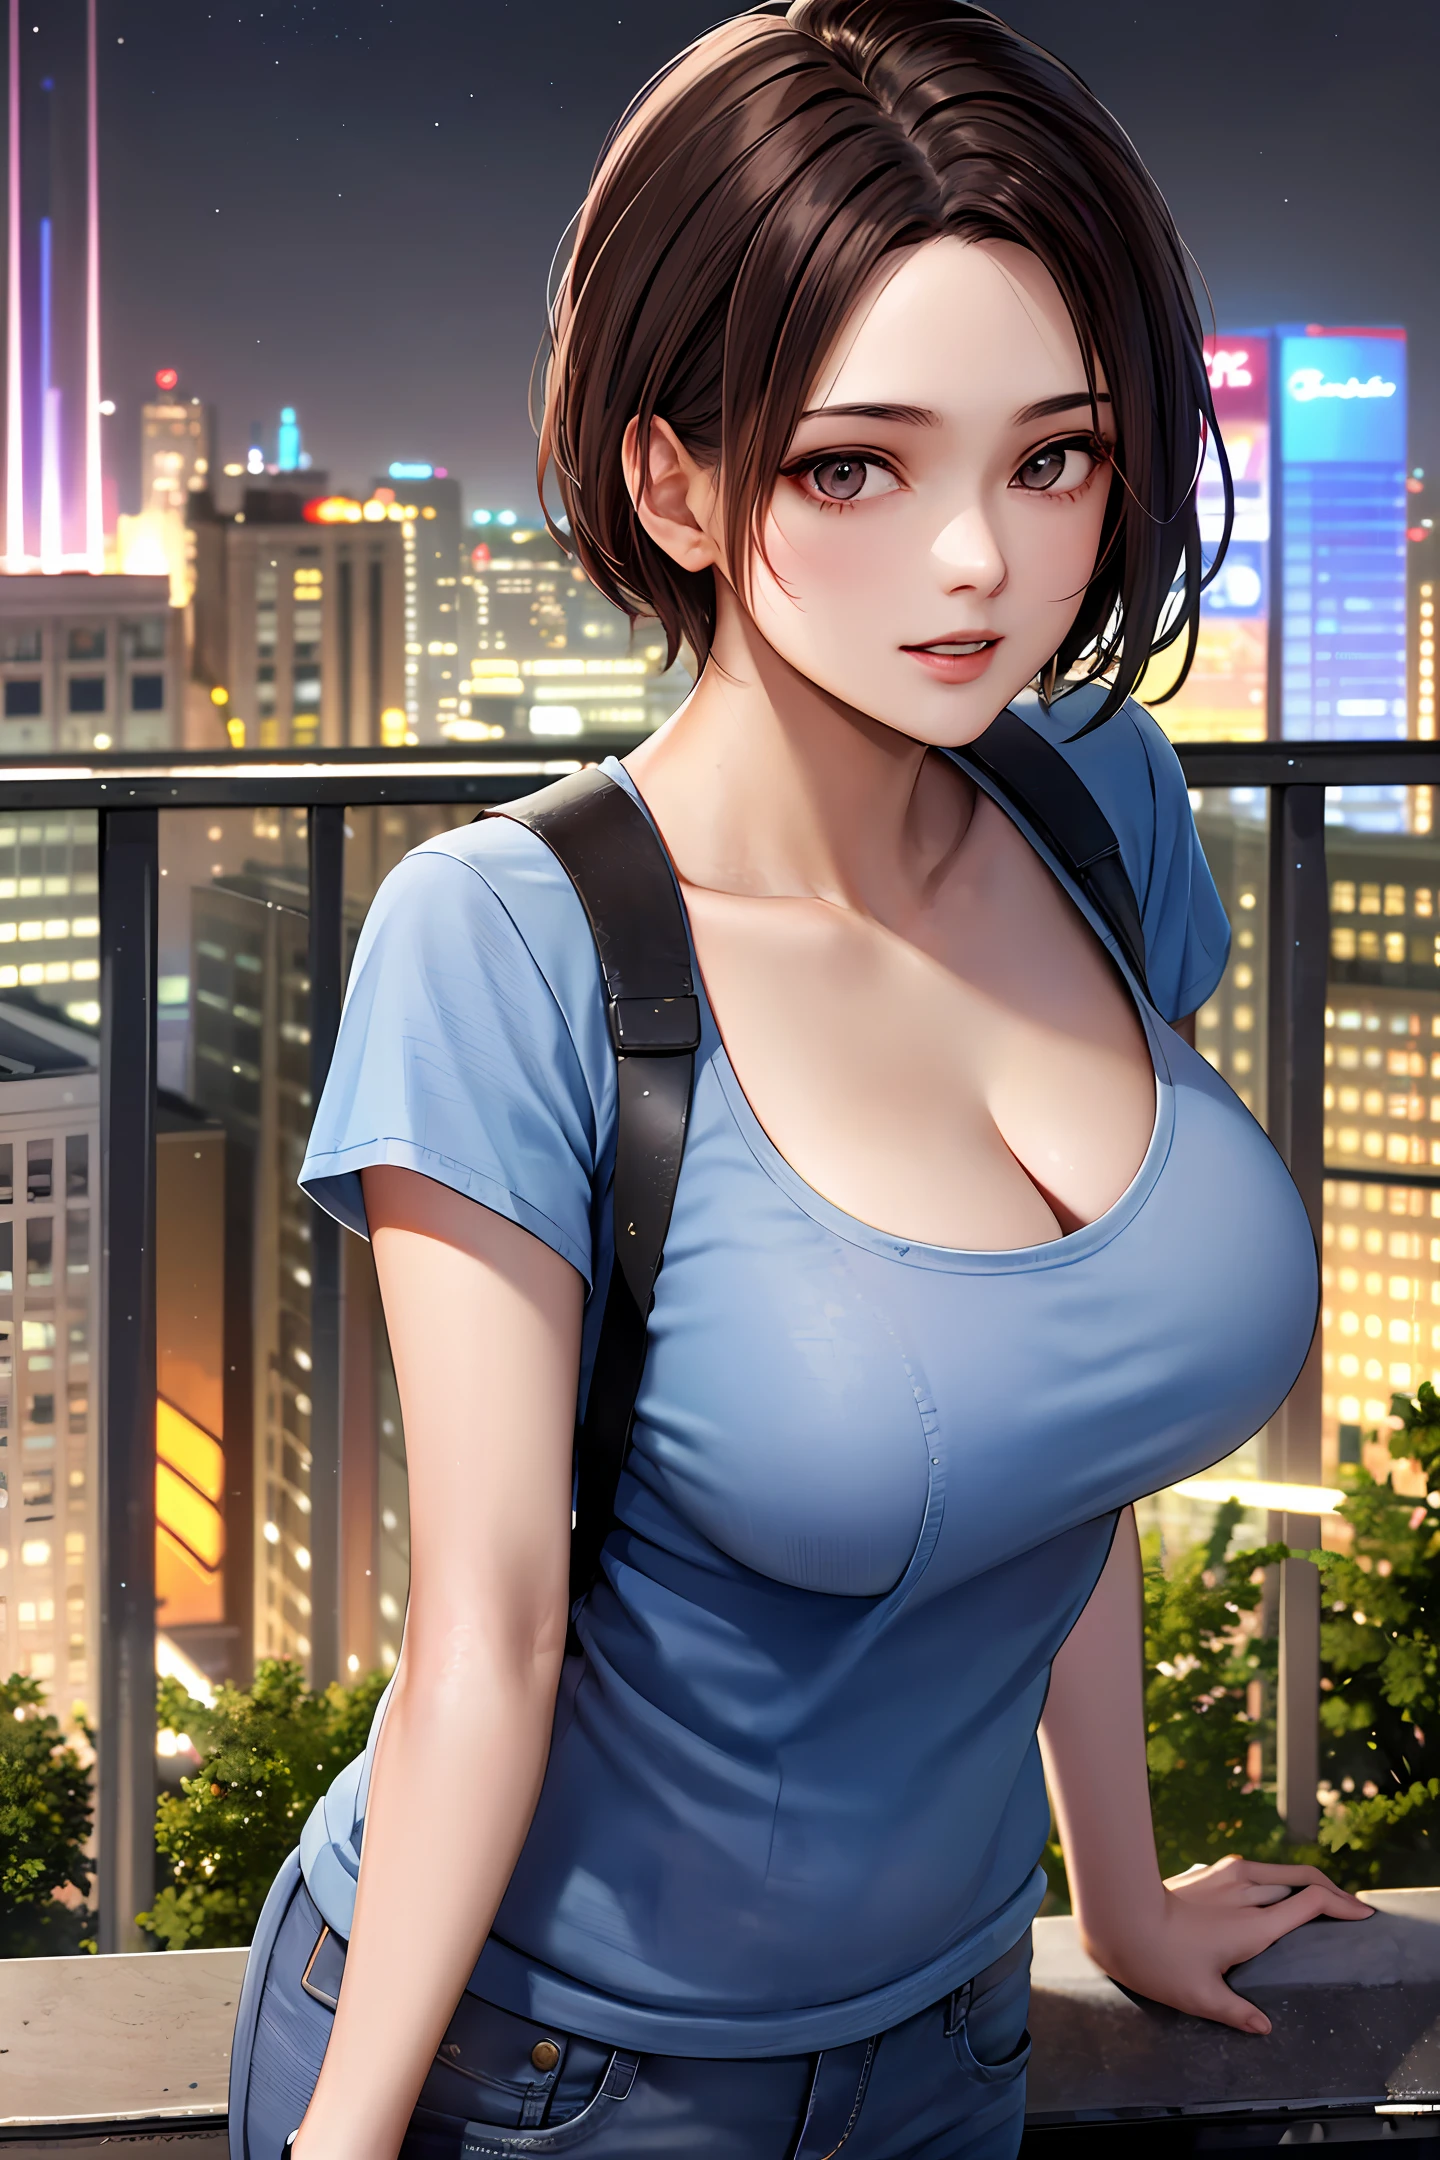 ((Midnight, Best quality, 8k, Masterpiece :1.3)), Whole body, Long legs, Sharp focus :1.2, A pretty woman with perfect figure :1.4, Slender abs :1.1, ((Dark brown hair, Big breasts :1.2)), (White tight tshirt, Jean bib, Standing:1.2), ((Night city view, Rooftop:1.3)), Highly detailed face and skin texture, Detailed eyes, Double eyelid